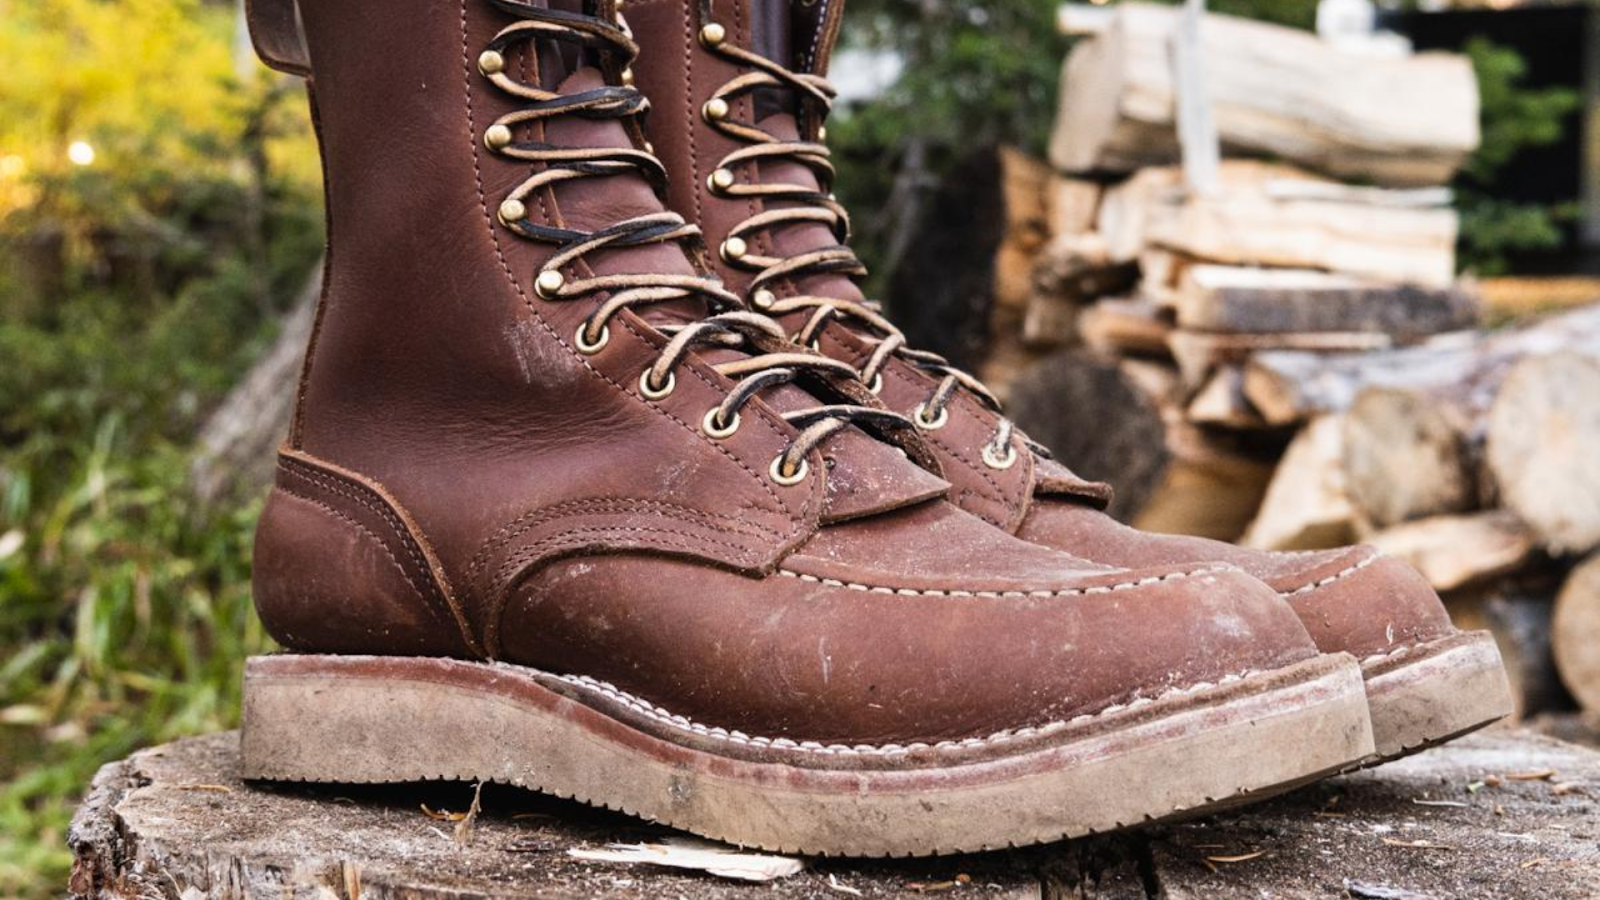 Proper Care And Maintenance Of Moc Toe Boots